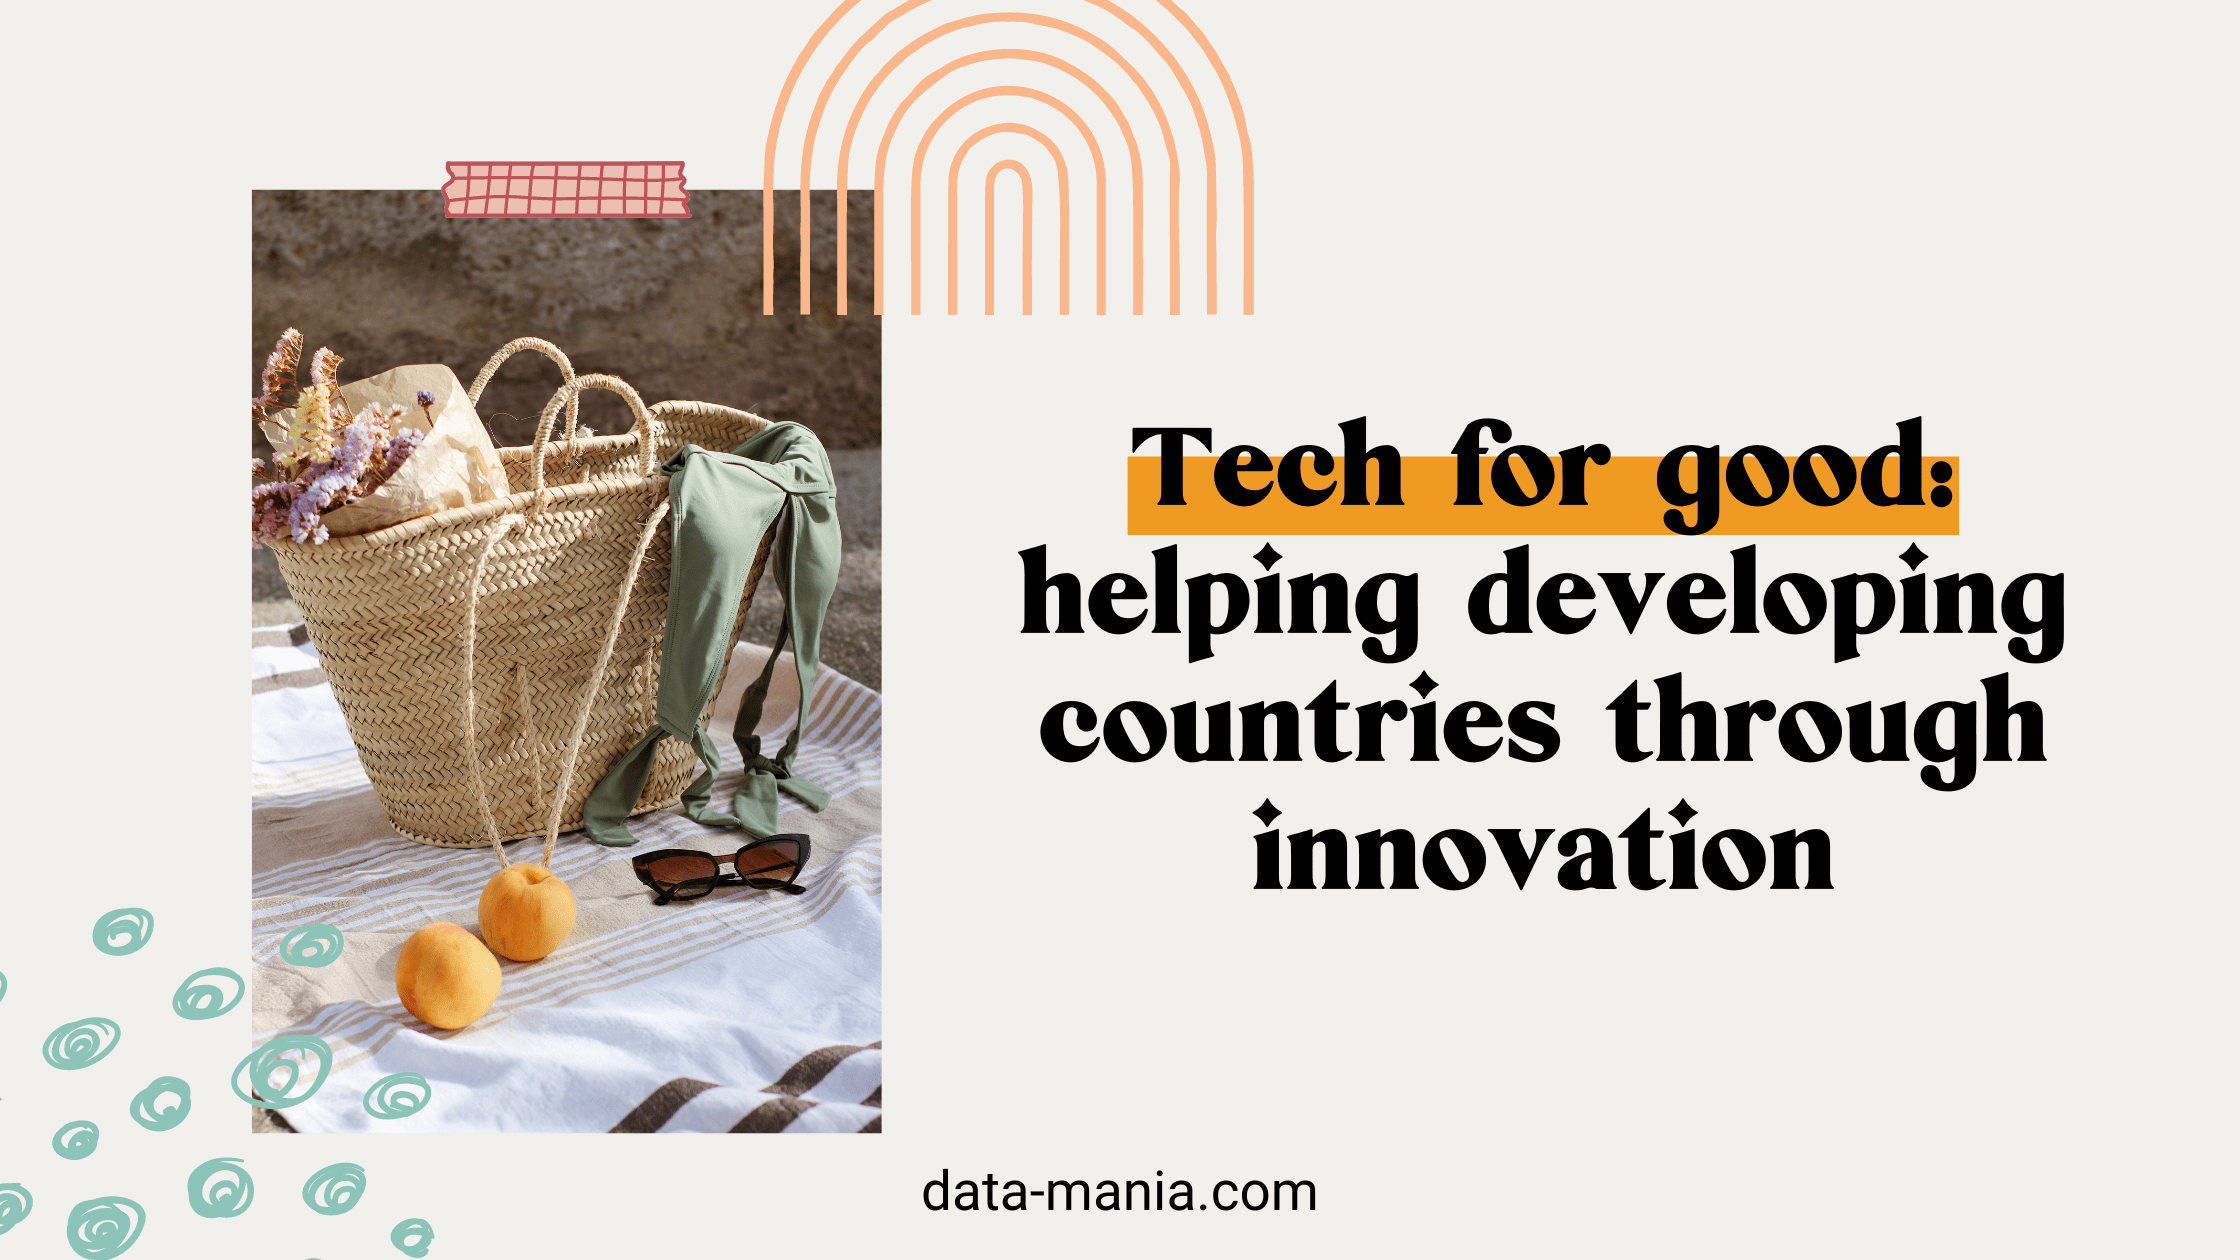 tech for good to bring innovation to developing countries